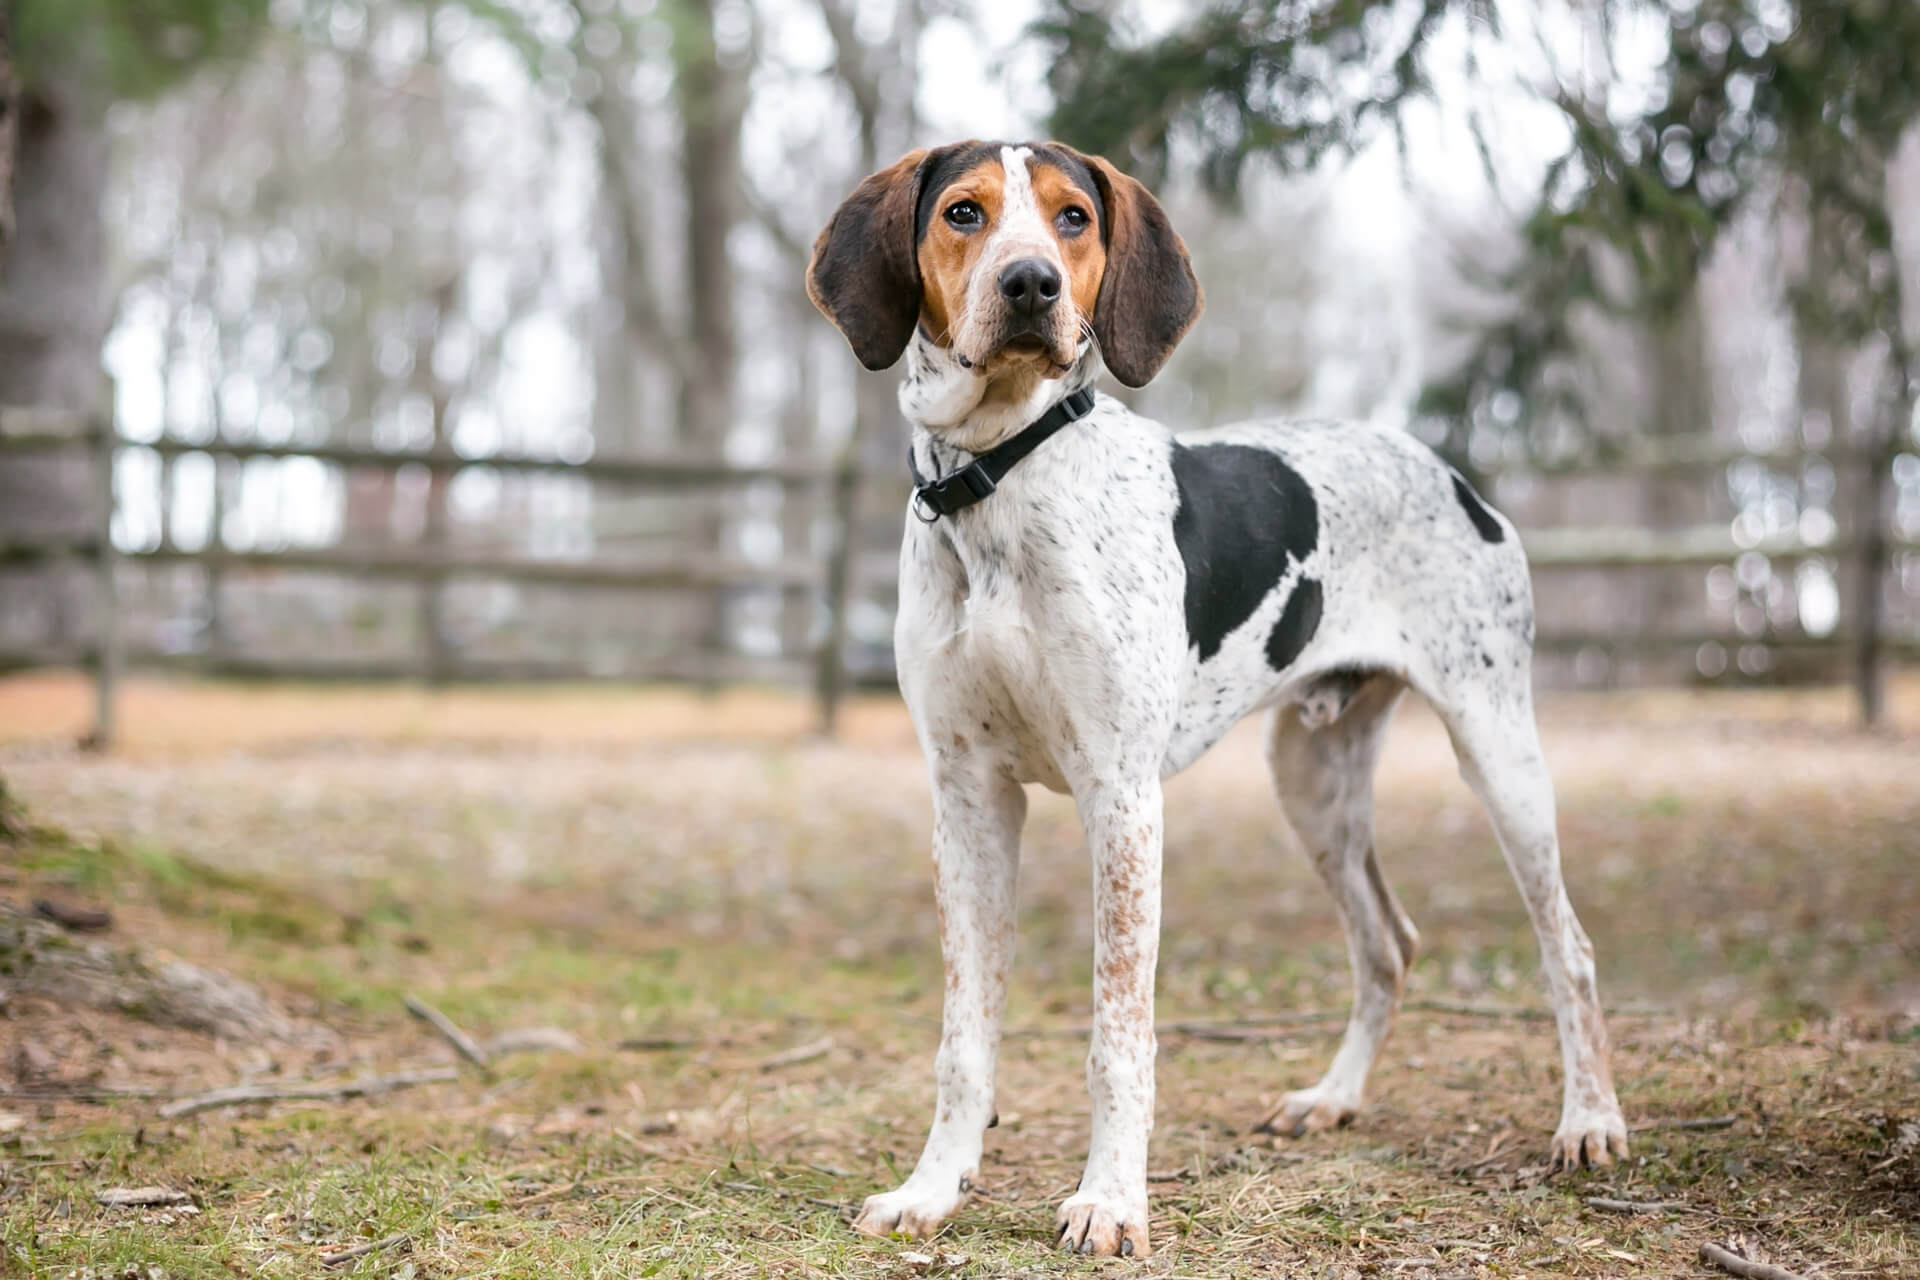 A Treeing Walker Coonhound in a farm